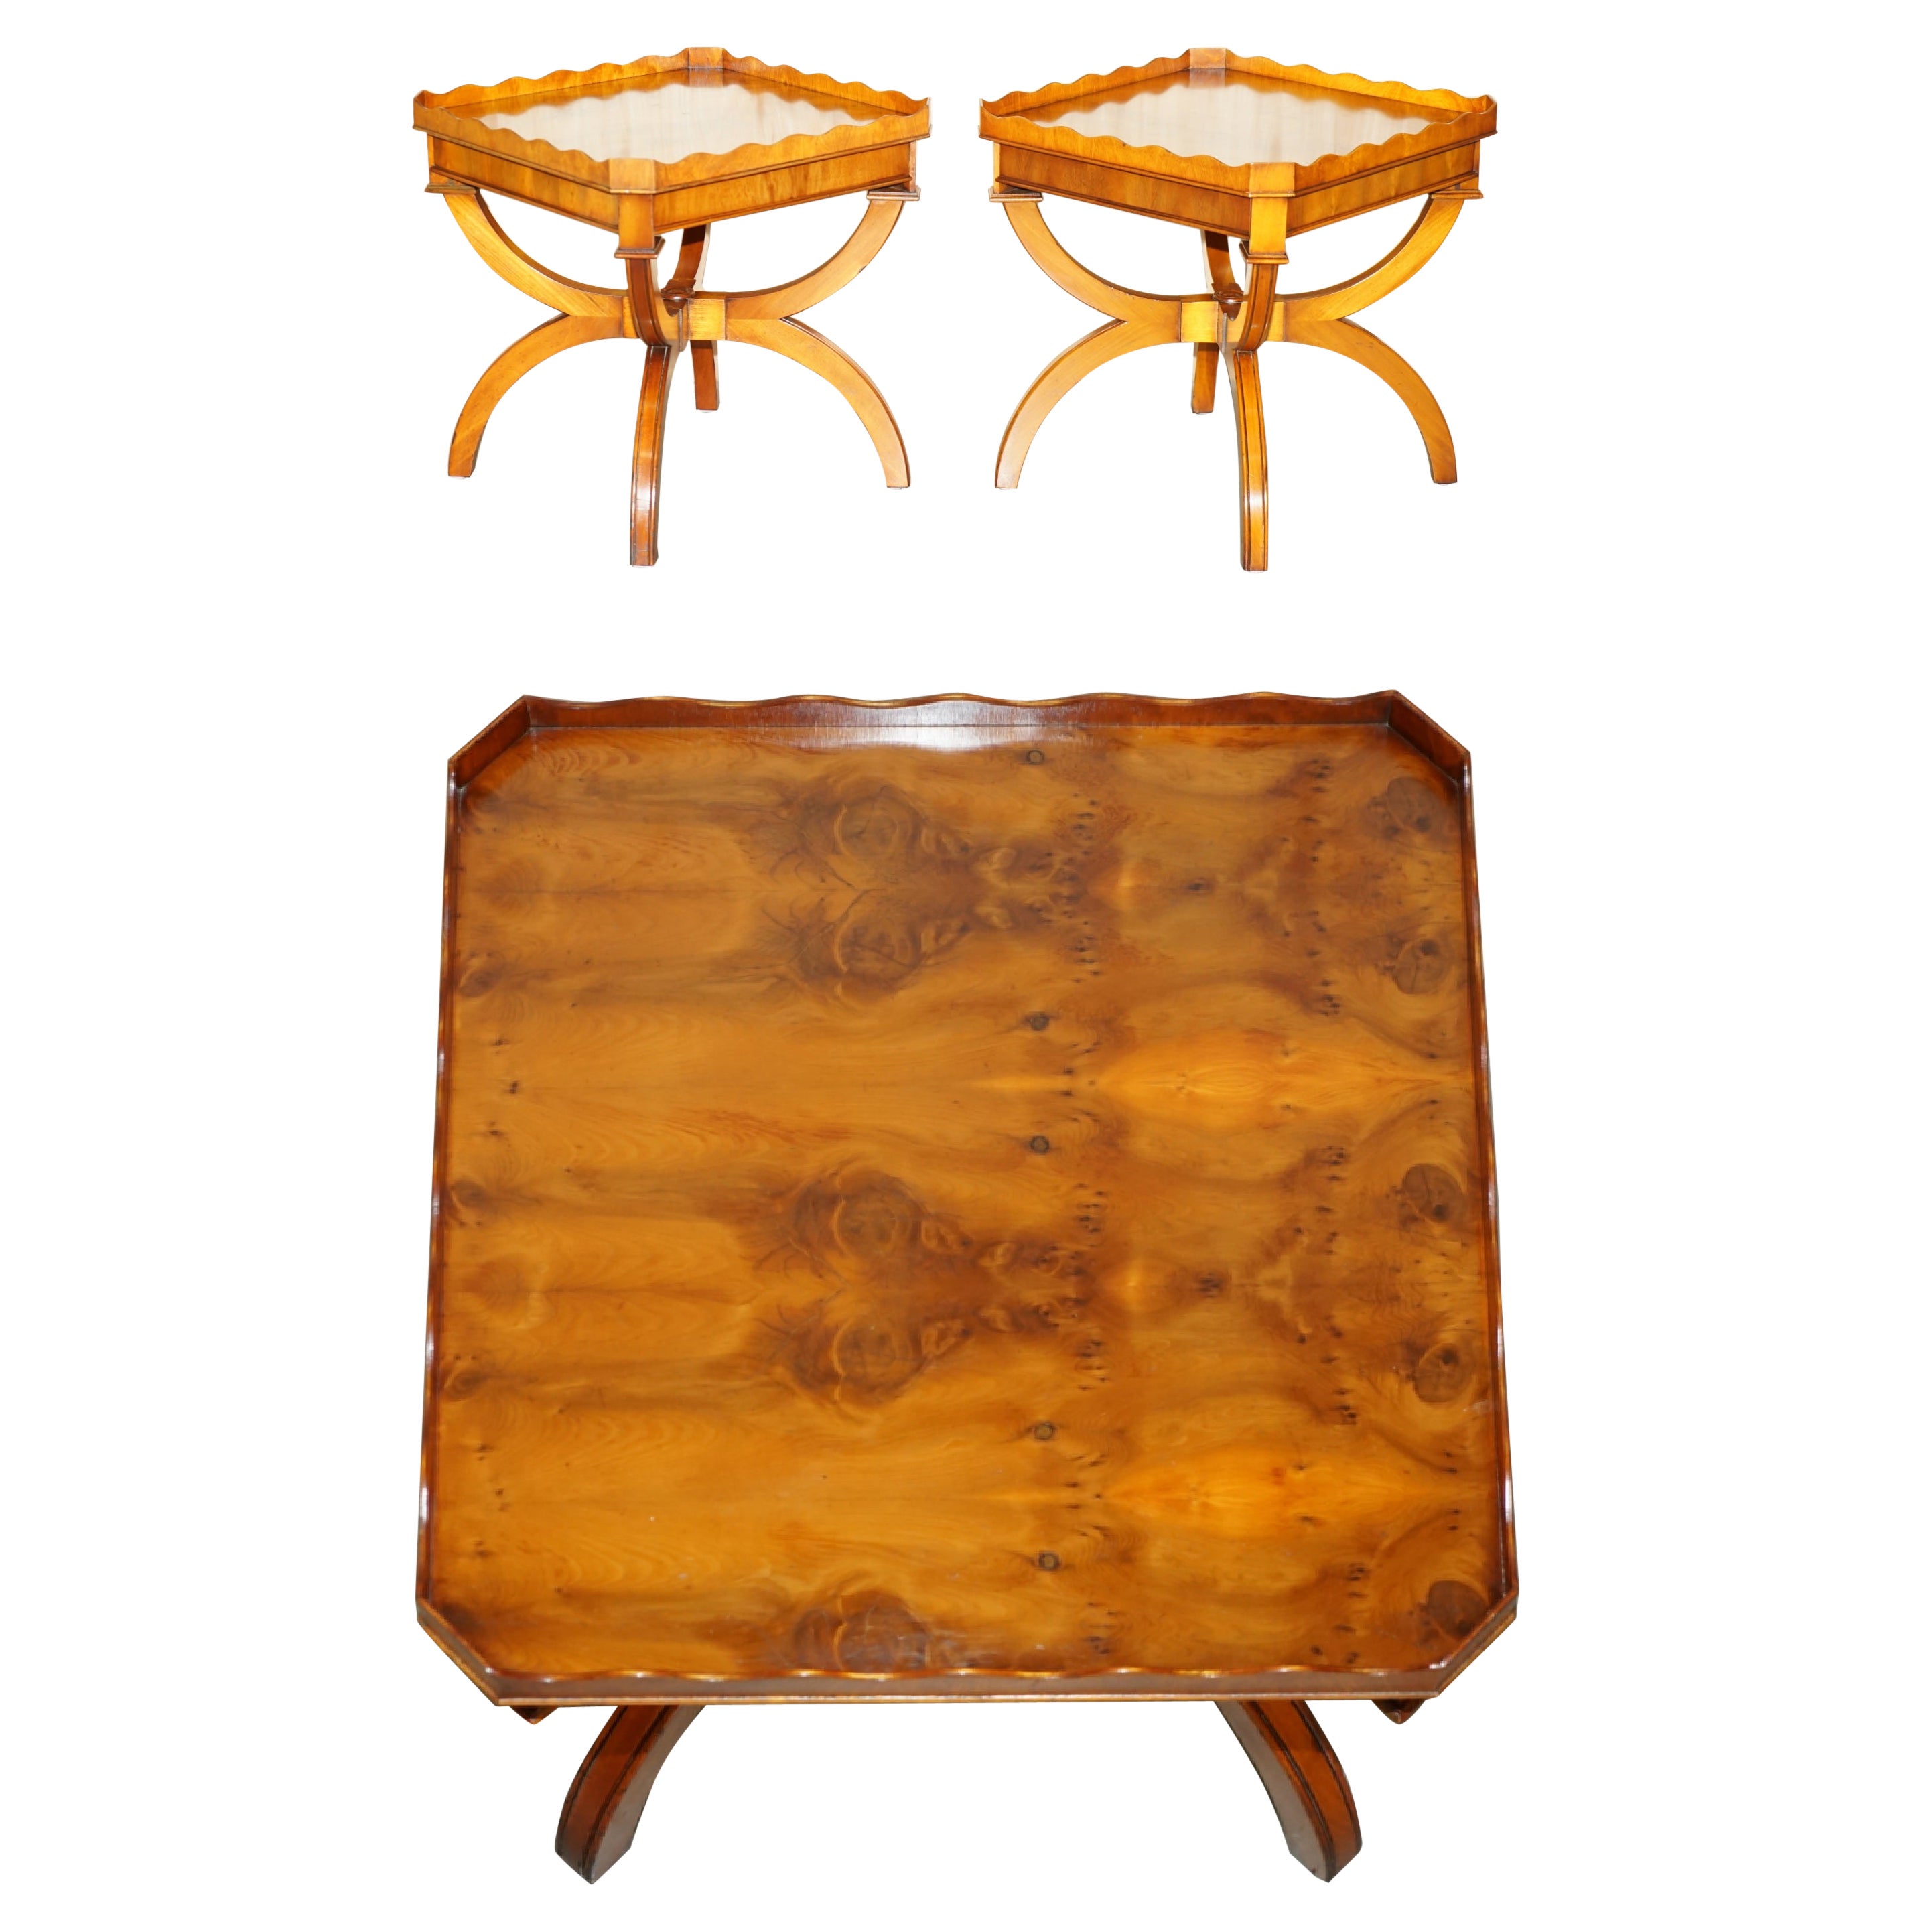 PAIR OF BEVAN FUNNELL ENGLAND BURR YEW SIDE TABLES EACH MIT einem SIGNLE DRAWEr